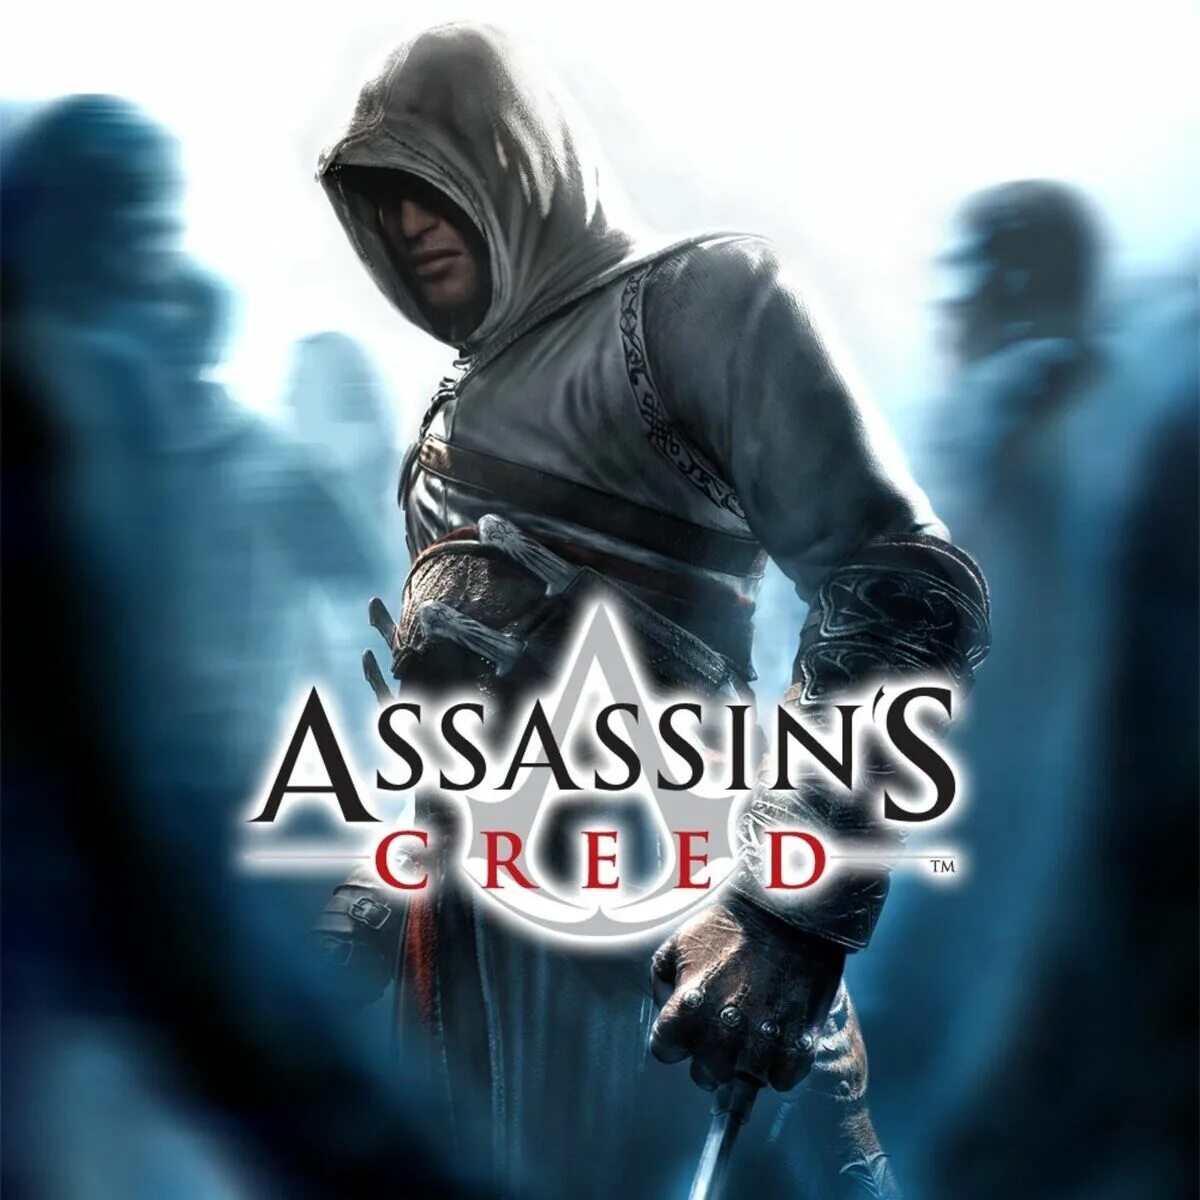 Assassin's creed soundtrack. Assassin s Creed. Assassin's Creed 1 обложка. Assassin's Creed 2007 обложка. Ассасин Крид 1 обложка.